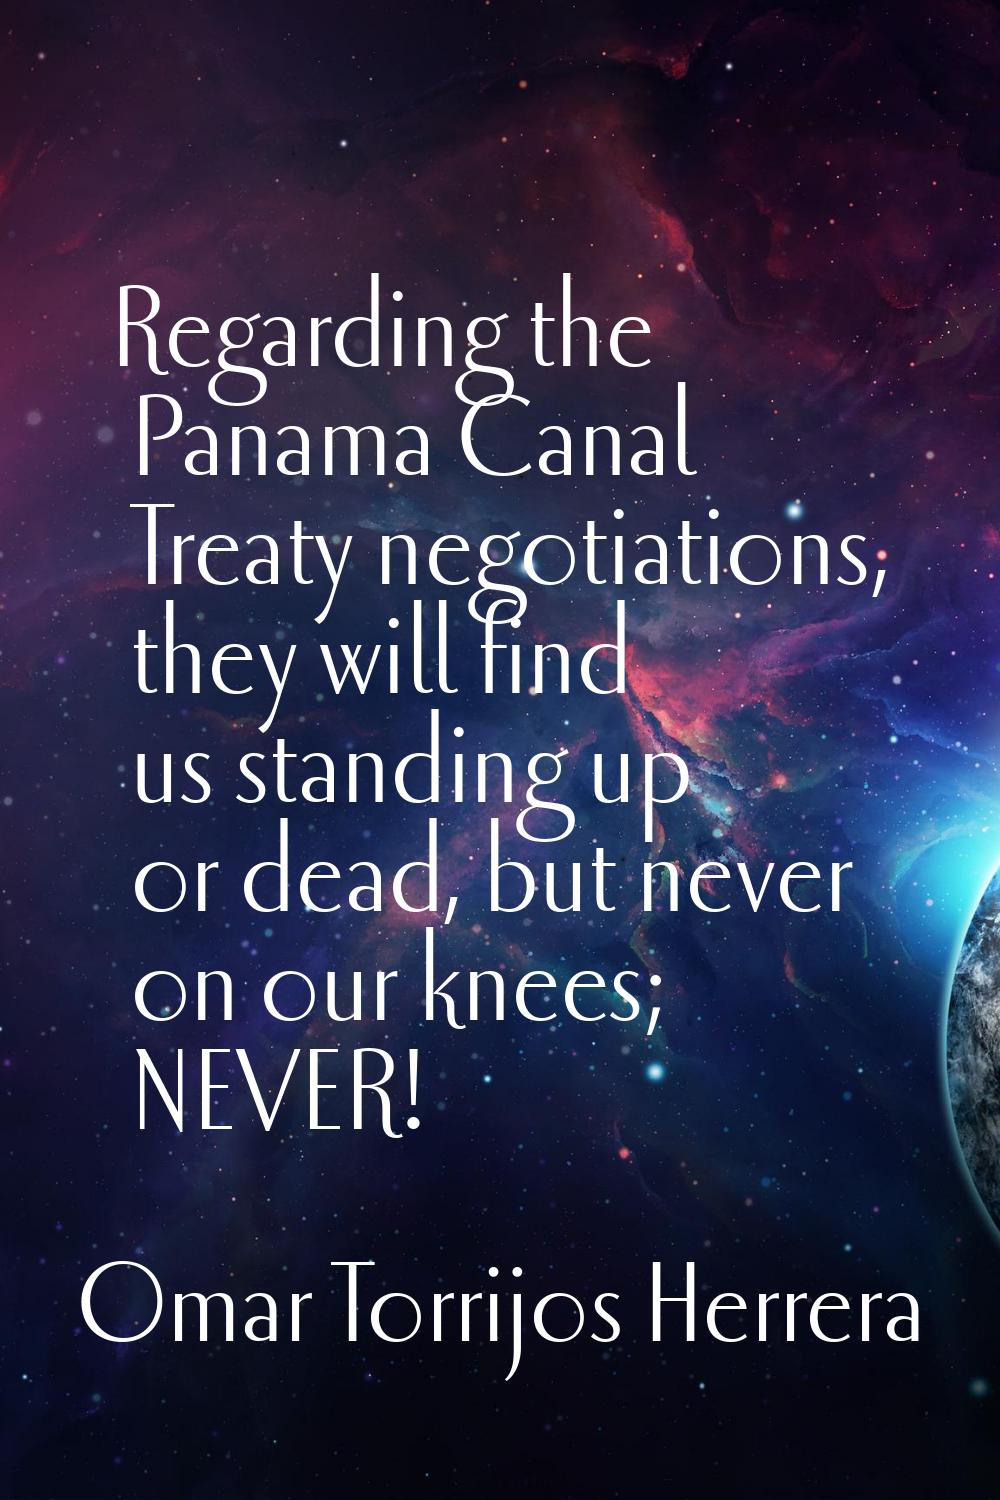 Regarding the Panama Canal Treaty negotiations, they will find us standing up or dead, but never on